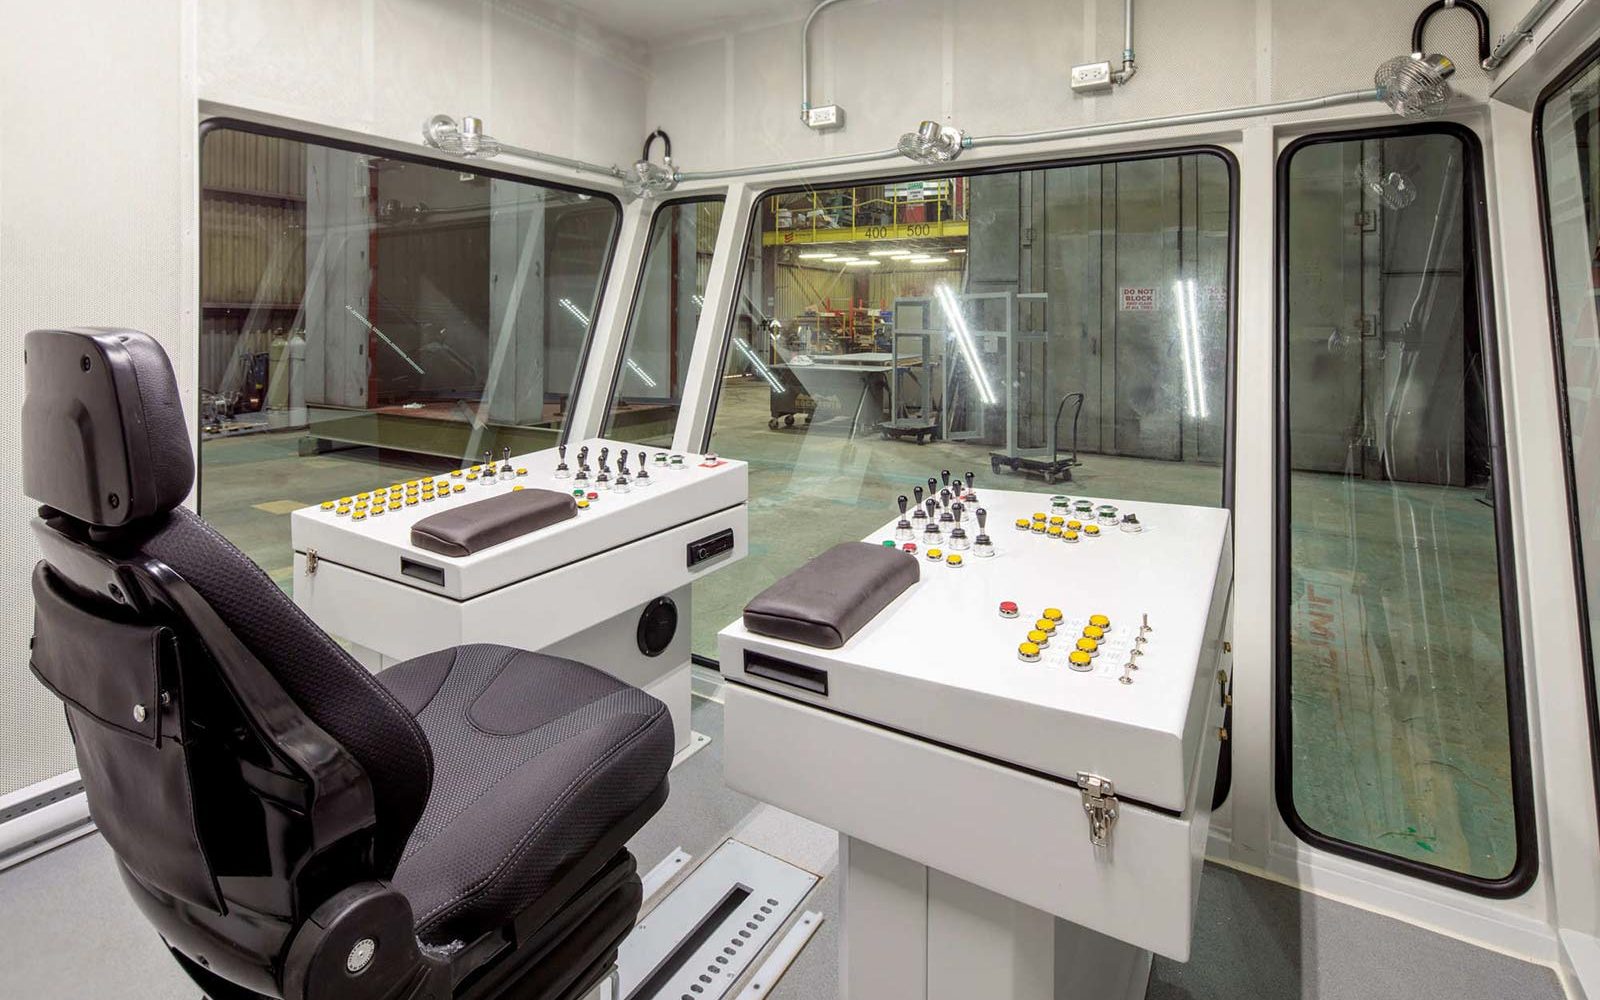 Pre-Fabricated, Op Cab, Operators Cab, Shatter Proof Glass, Operators Chair, Remote I/O, Sonic Enclosures